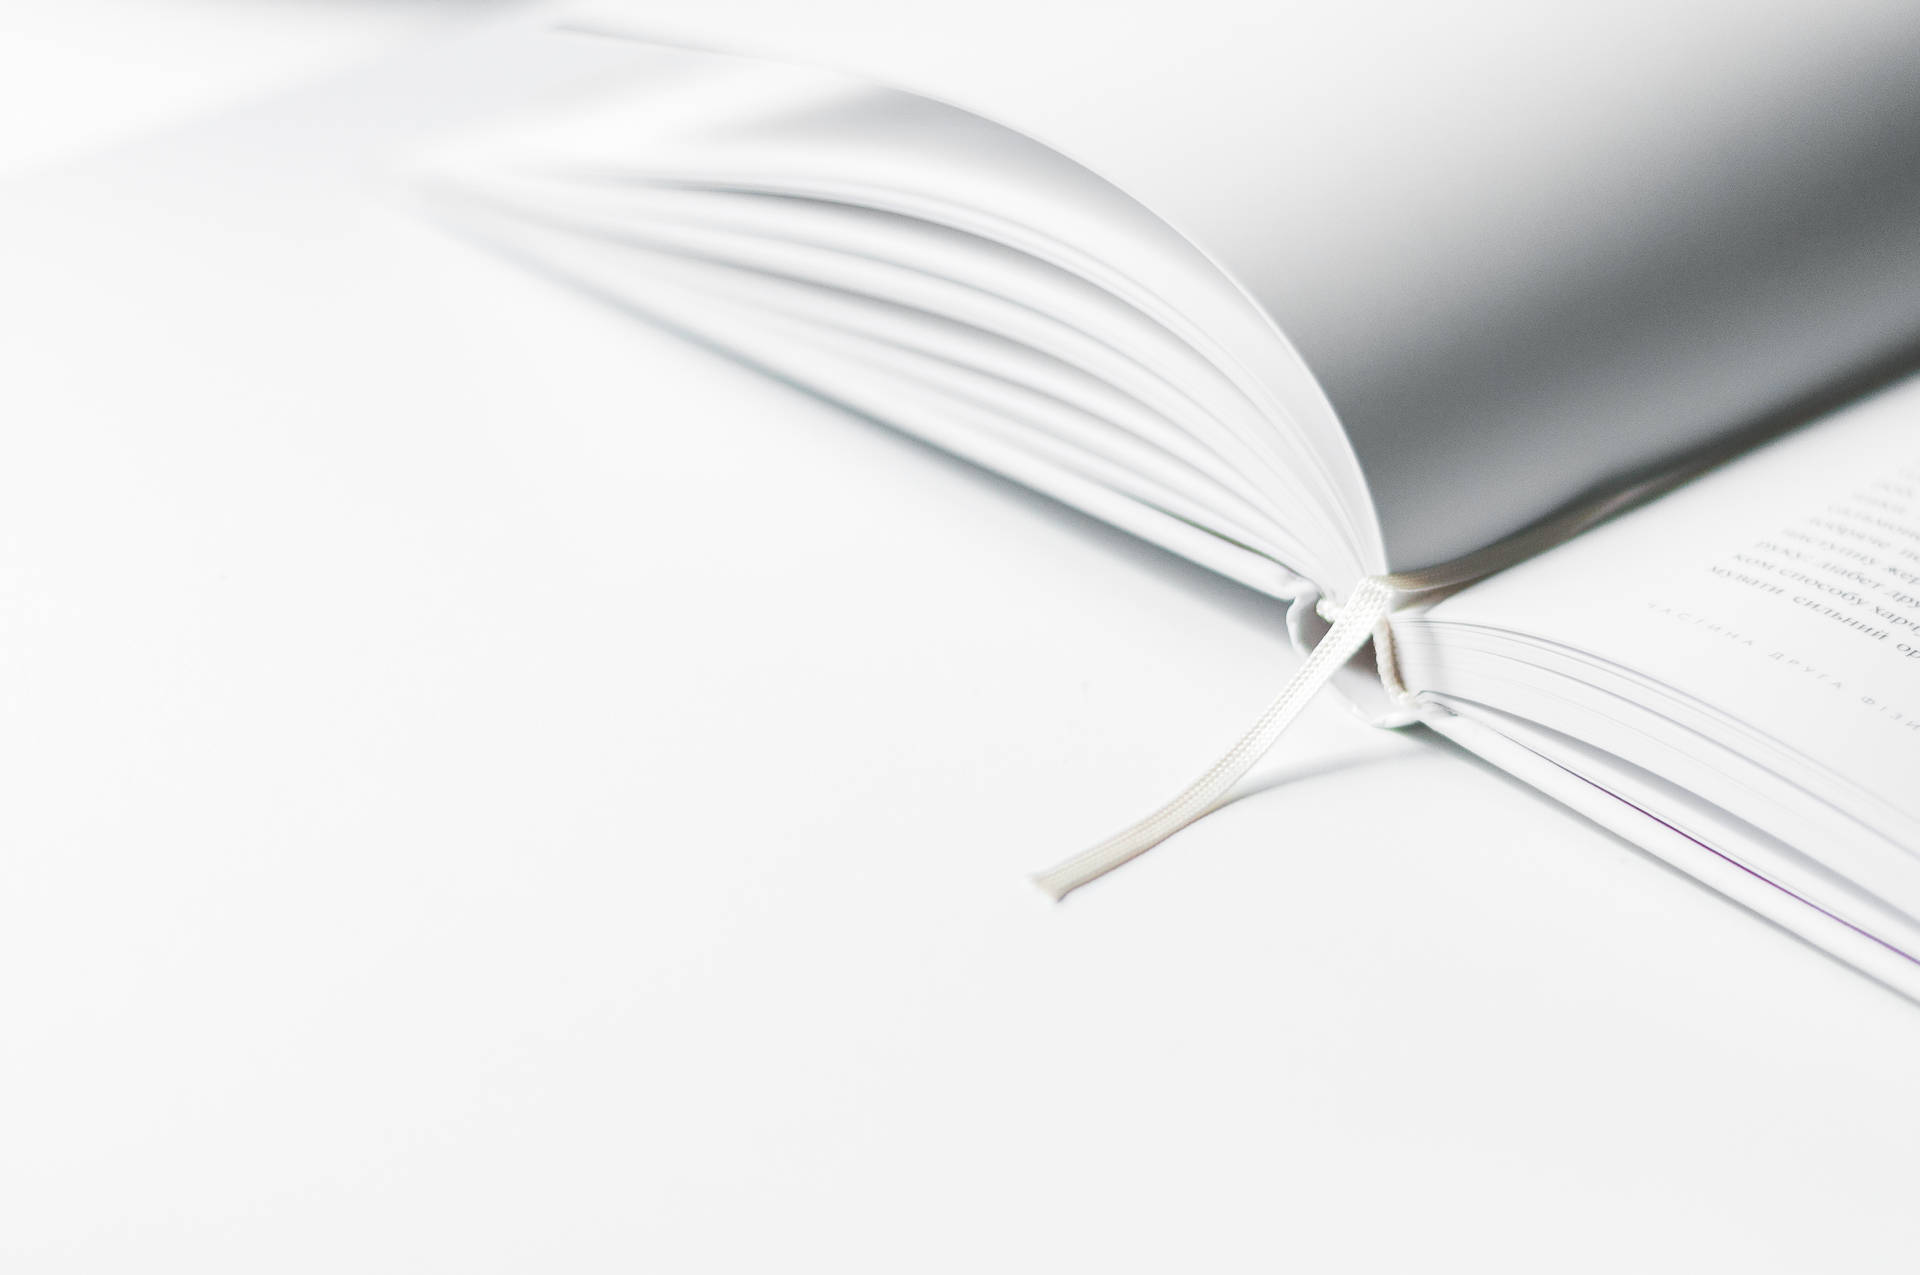 Explore your ideas with this blank open book Wallpaper